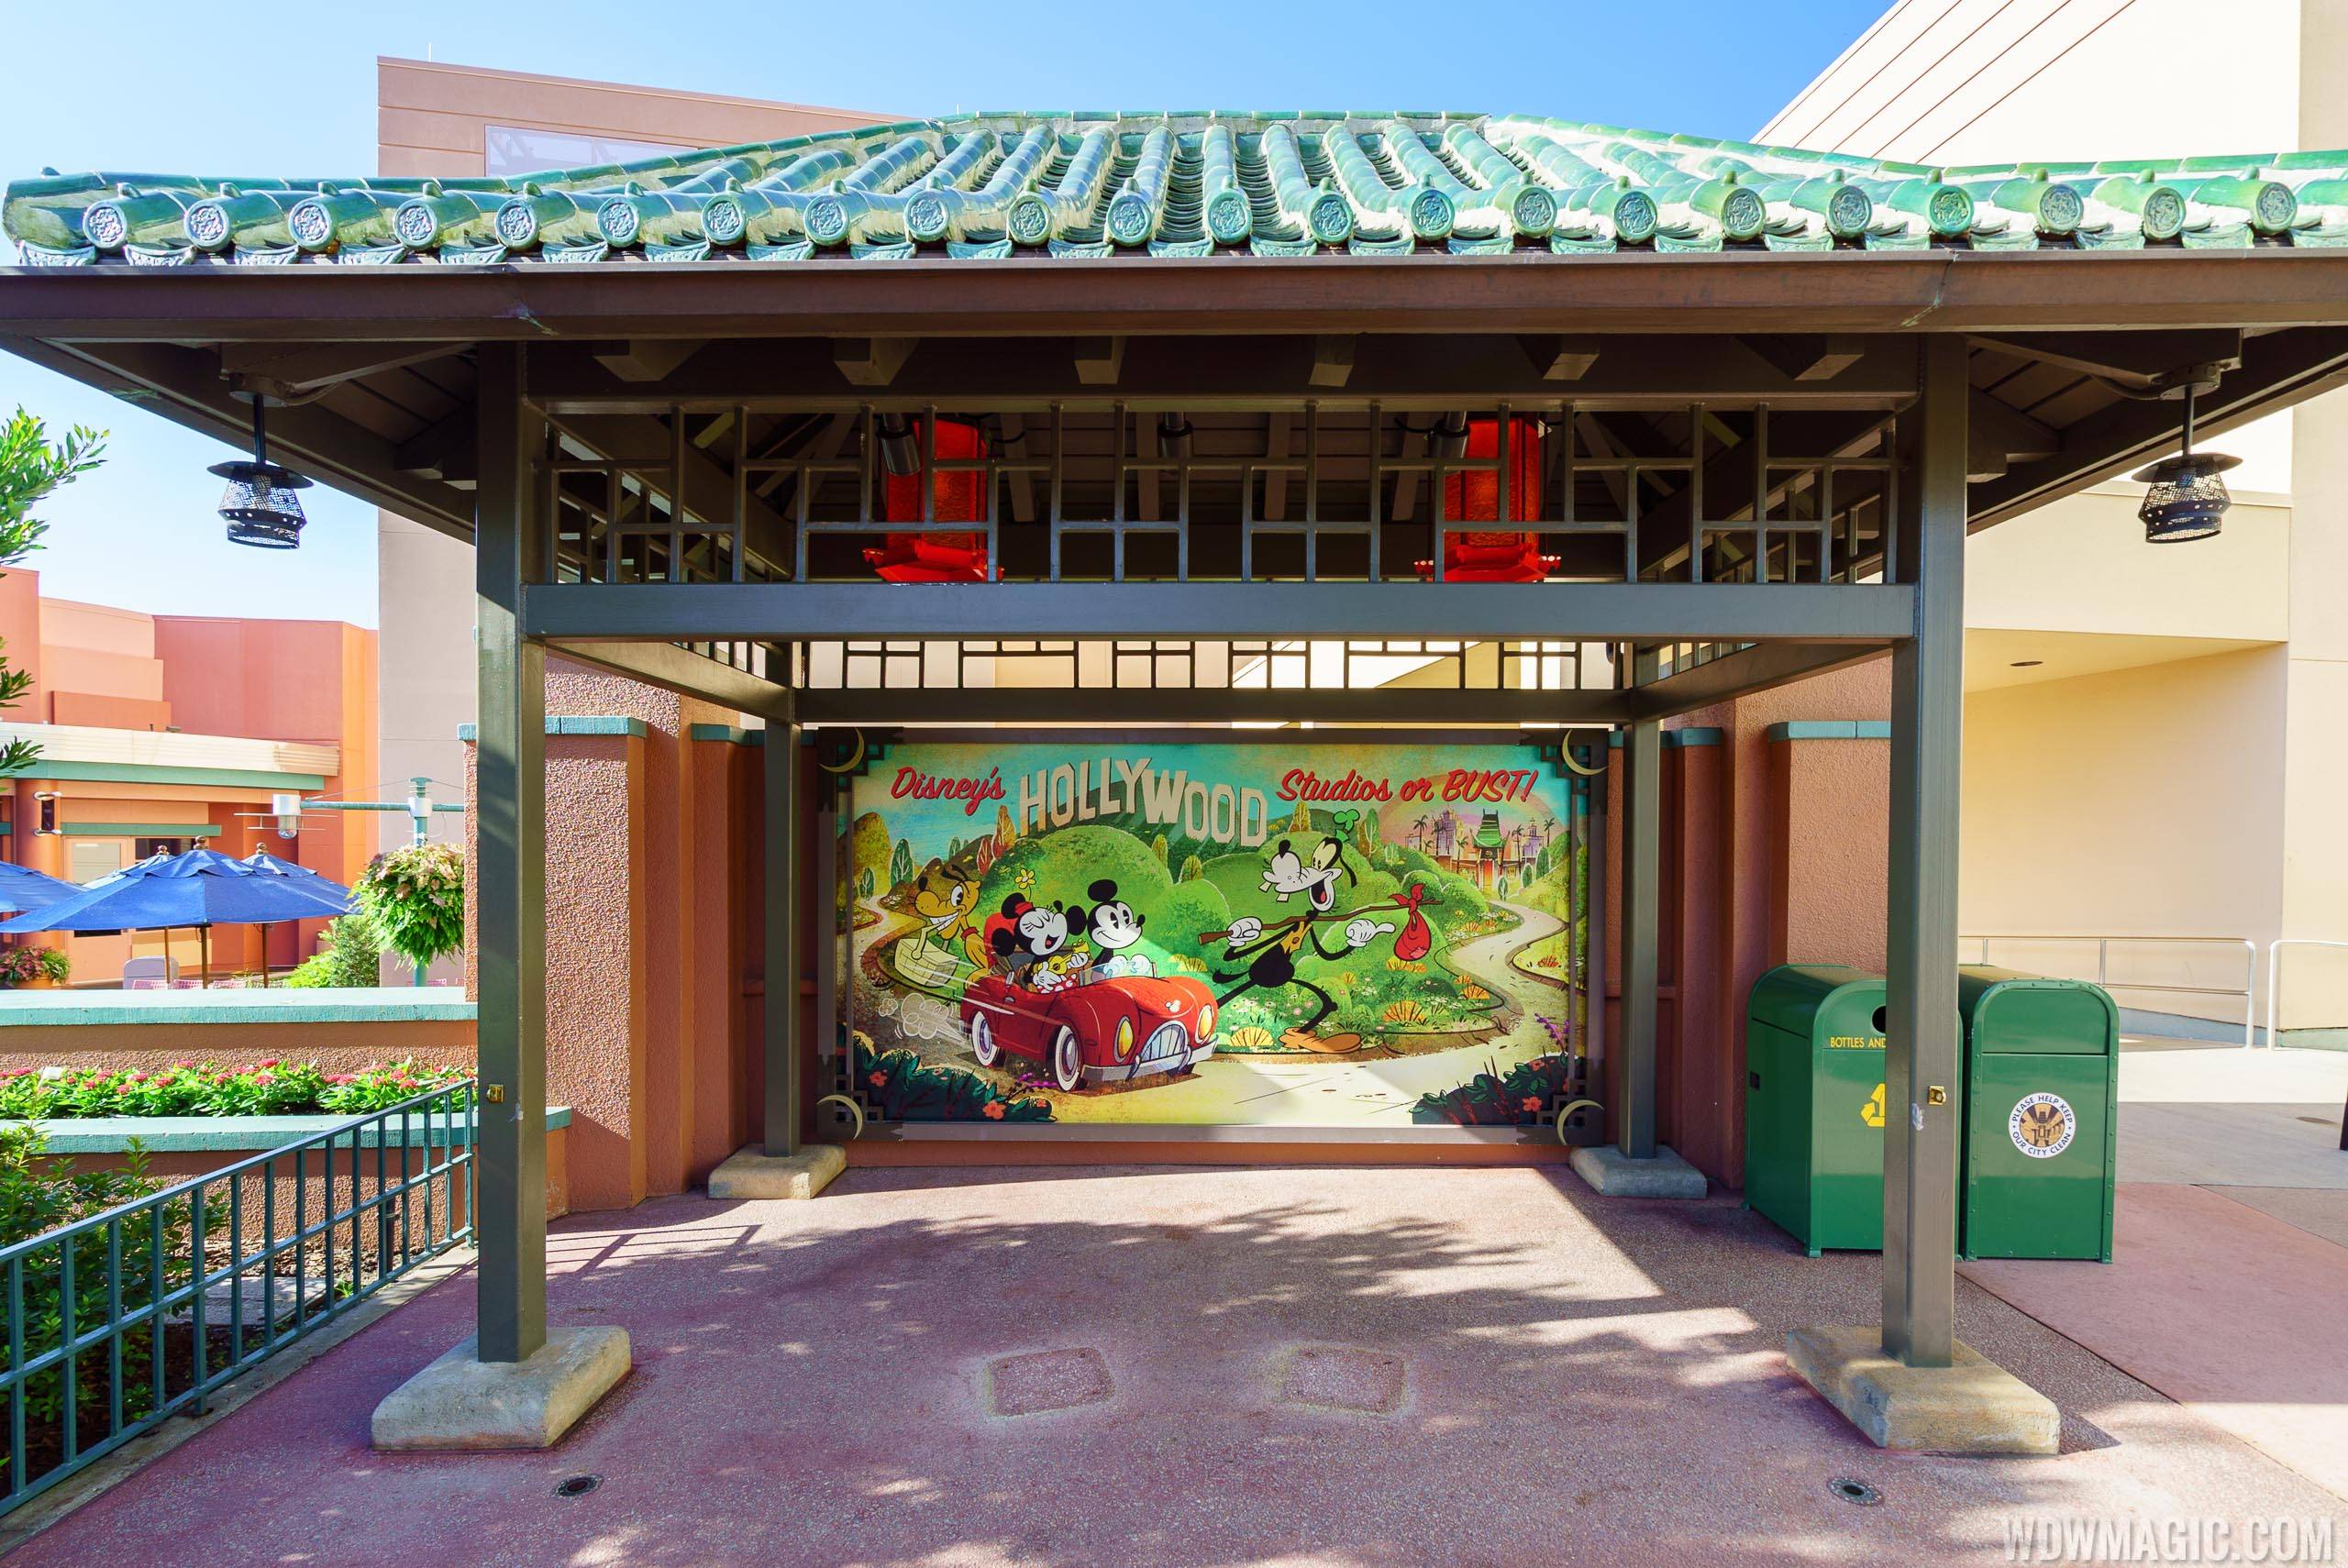 New photo op in the former TCM photo op location